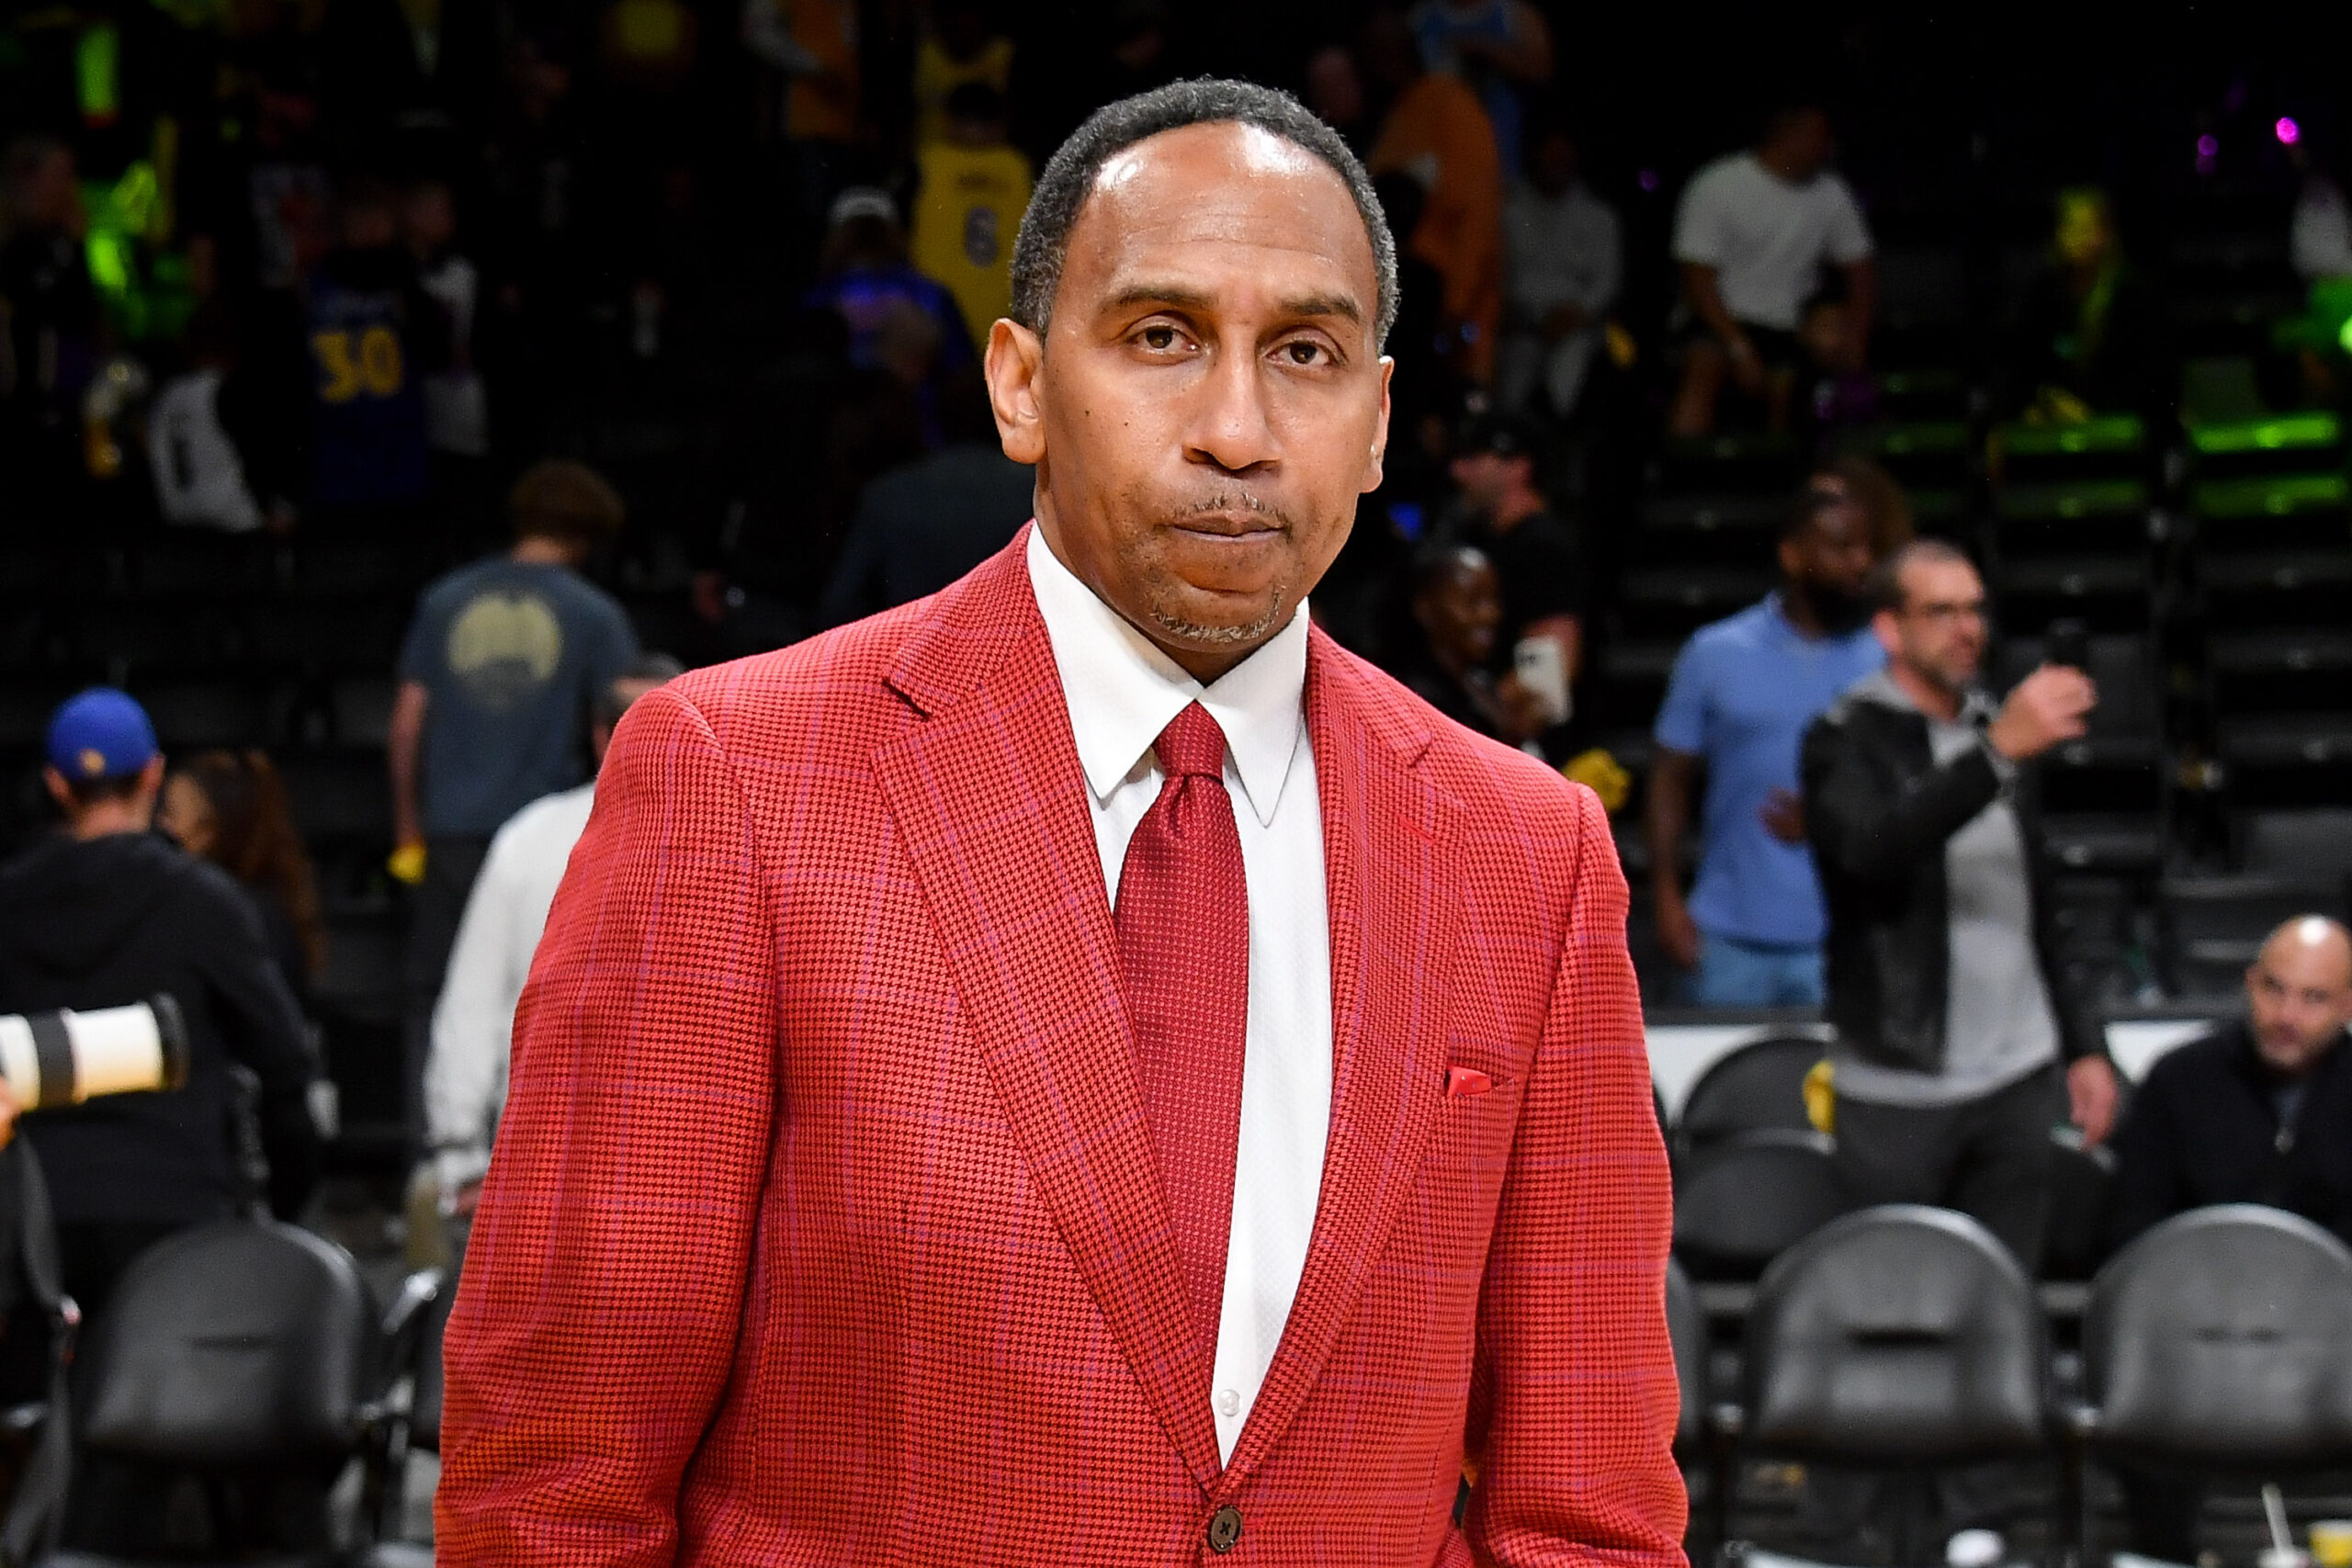 Stephen A. Smith Trolls Dallas Cowboys After Brutal Cardinals Loss